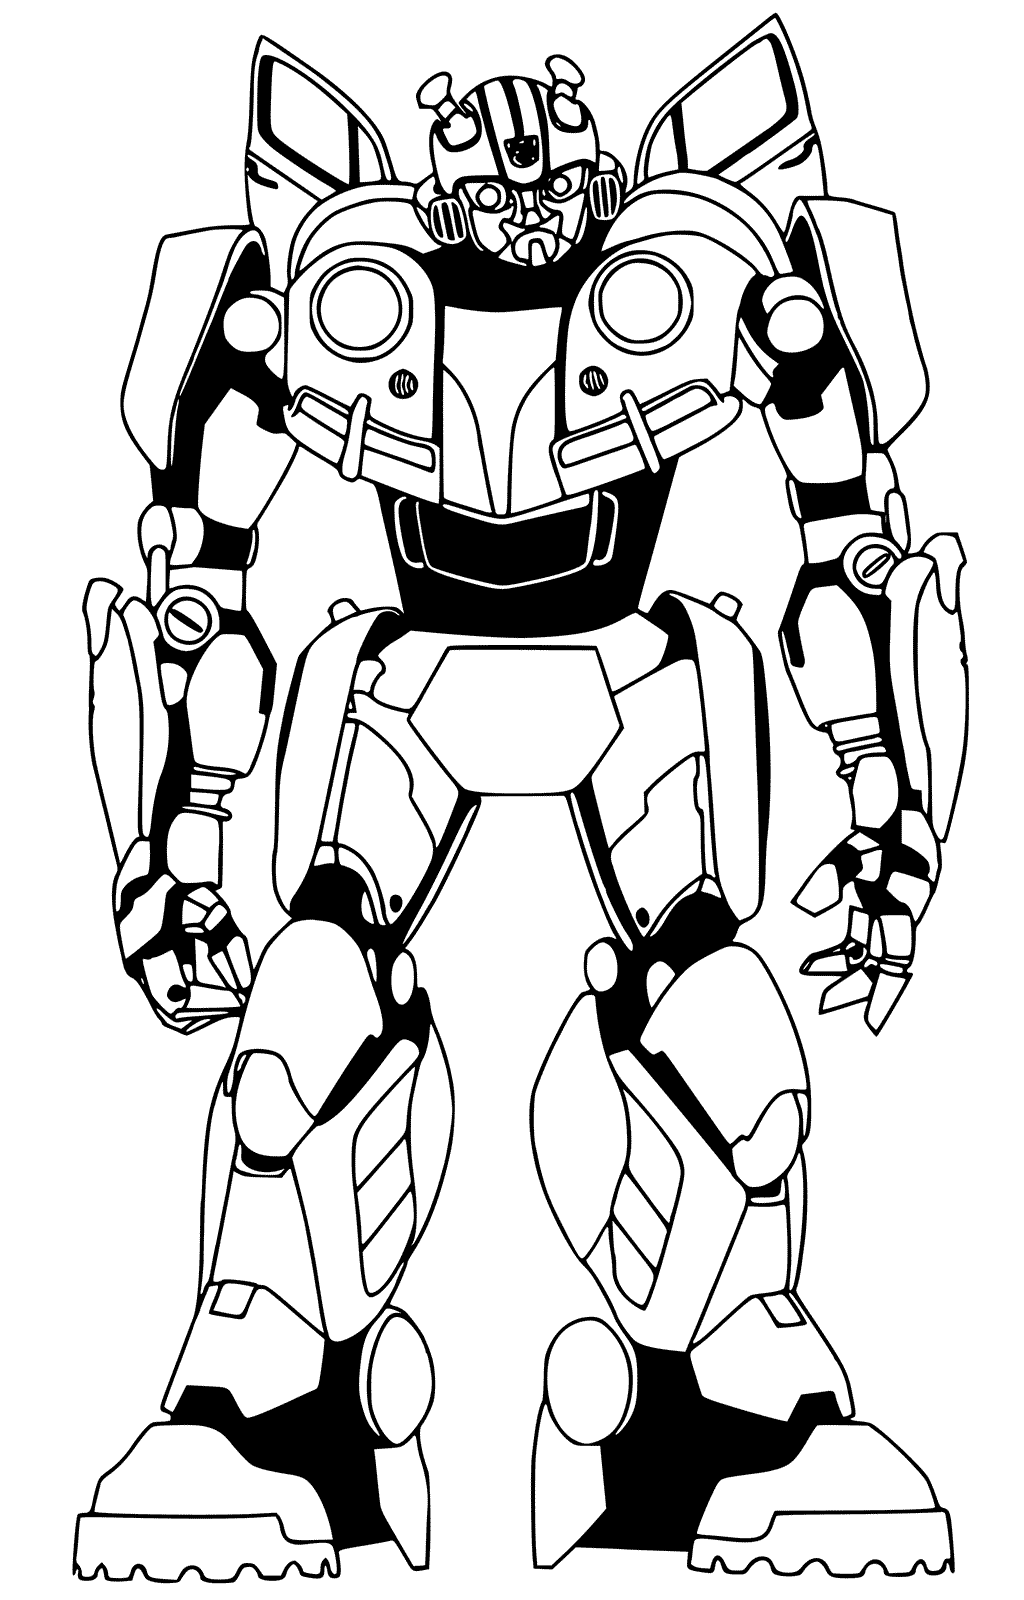 Bumblebee Coloring Pages - Best Coloring Pages For Kids - Coloring Home